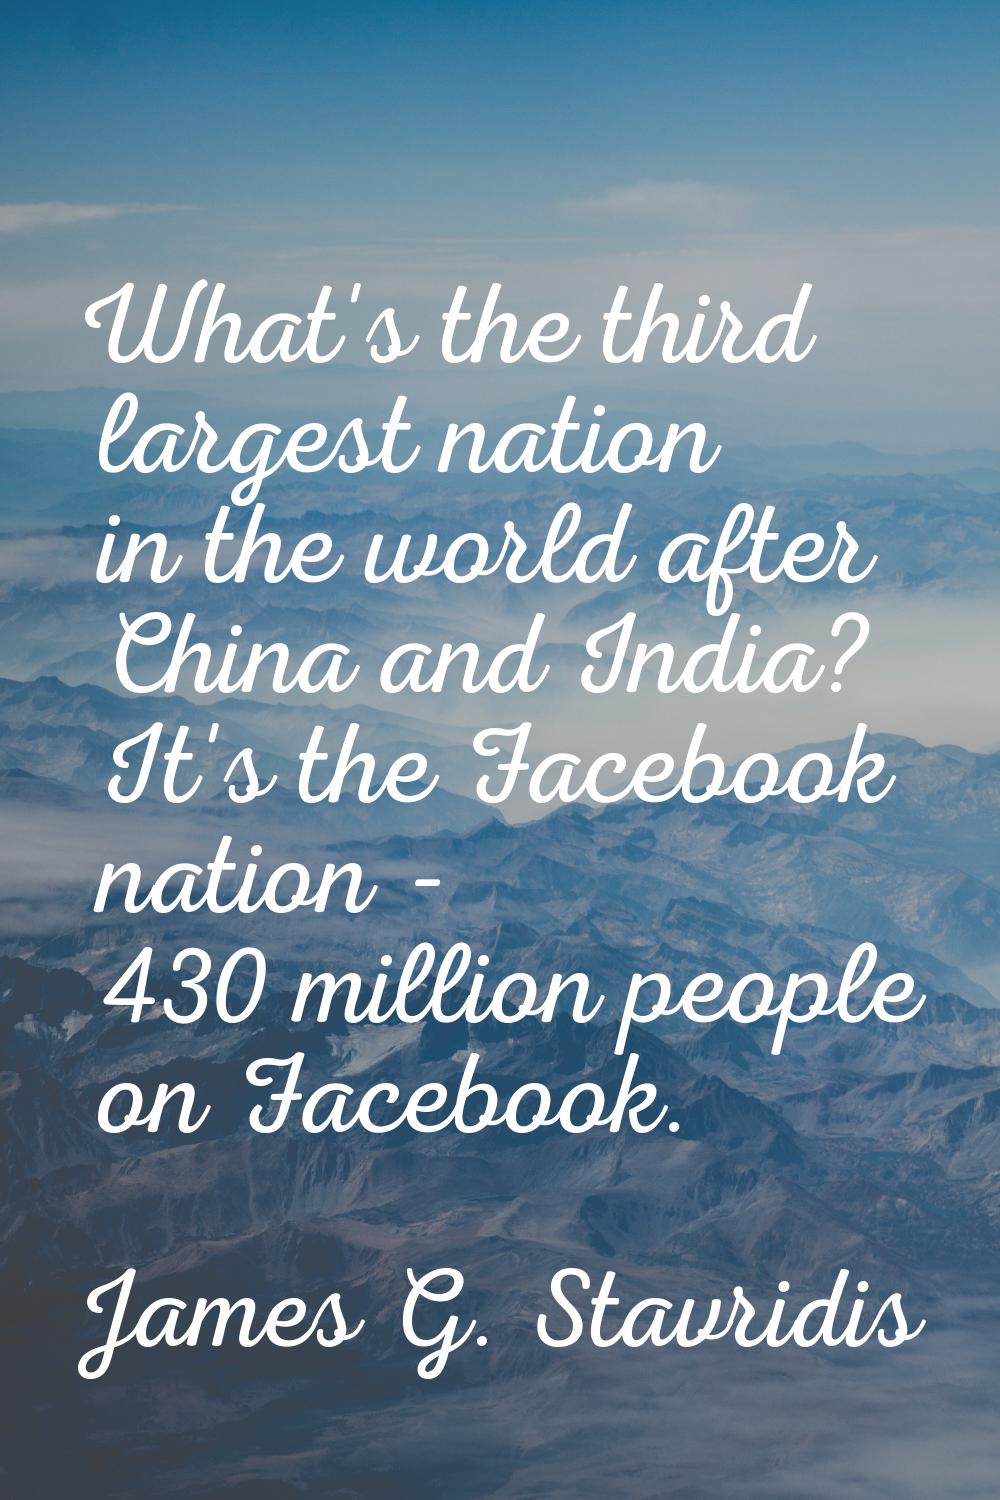 What's the third largest nation in the world after China and India? It's the Facebook nation - 430 